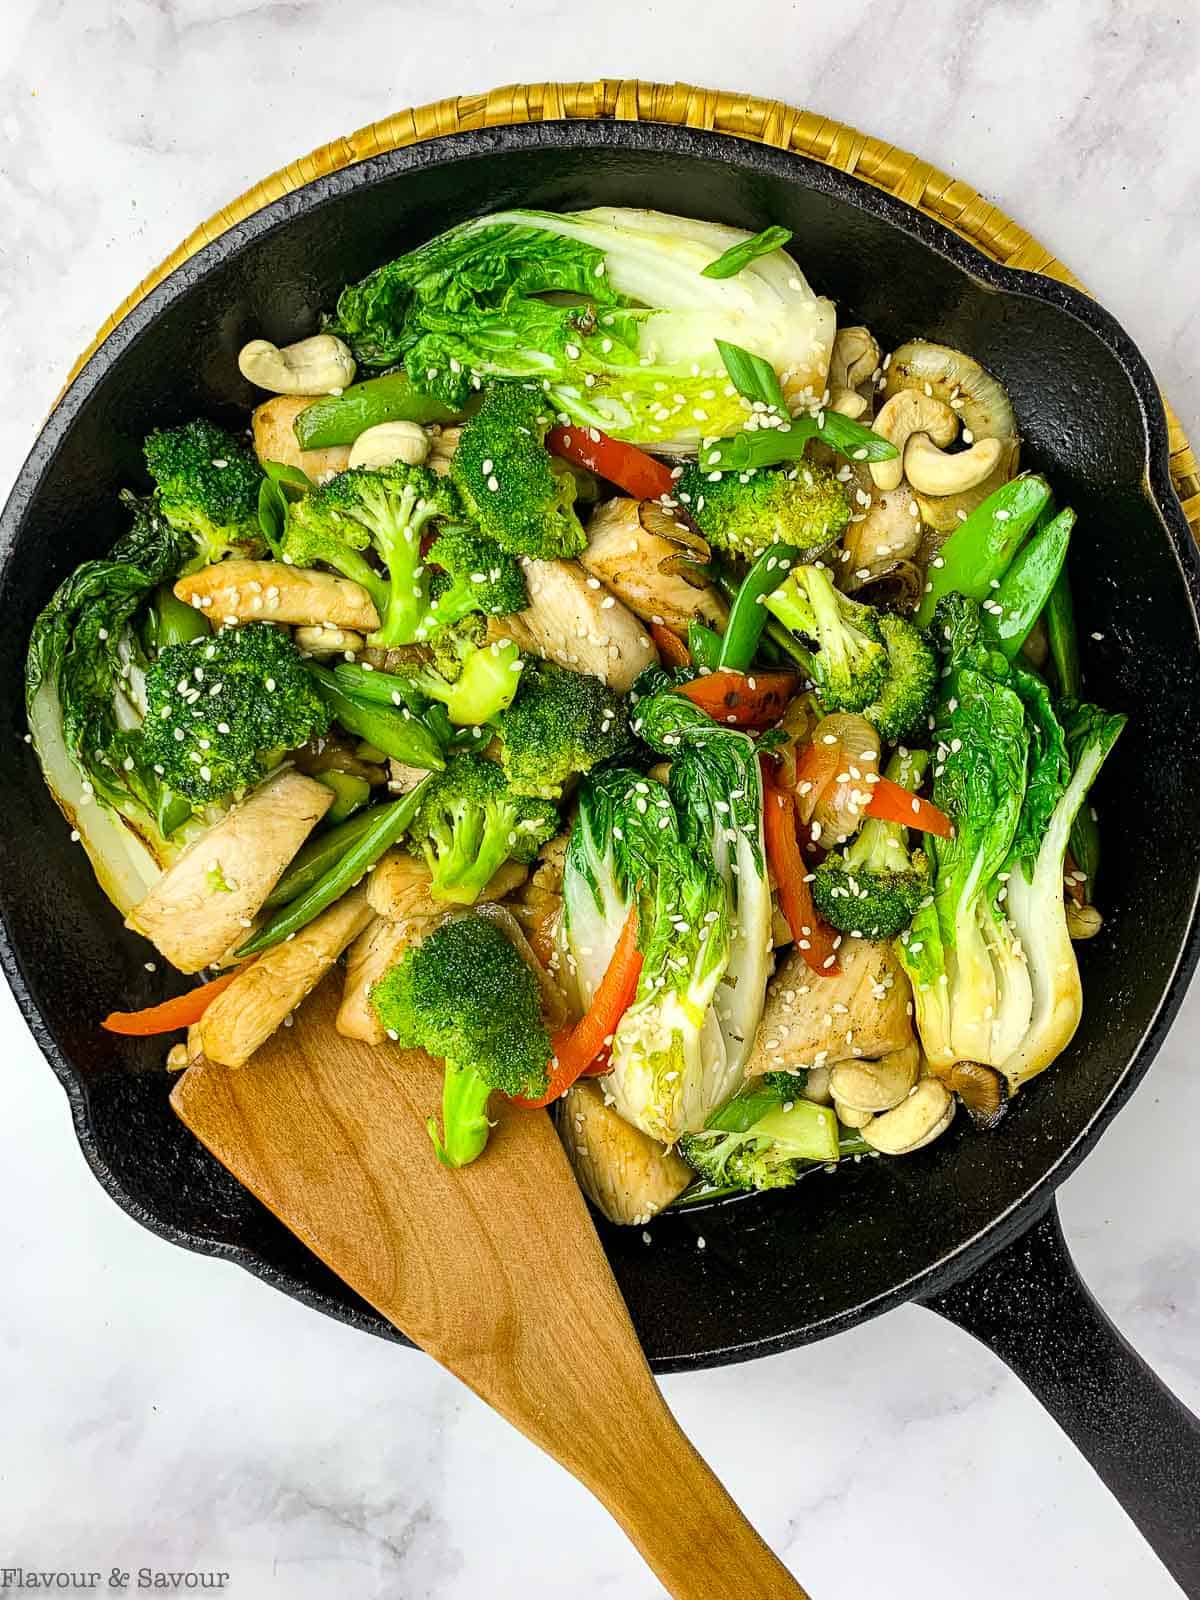 Japanese chicken stir fry in a cast iron skillet with a wooden spatula